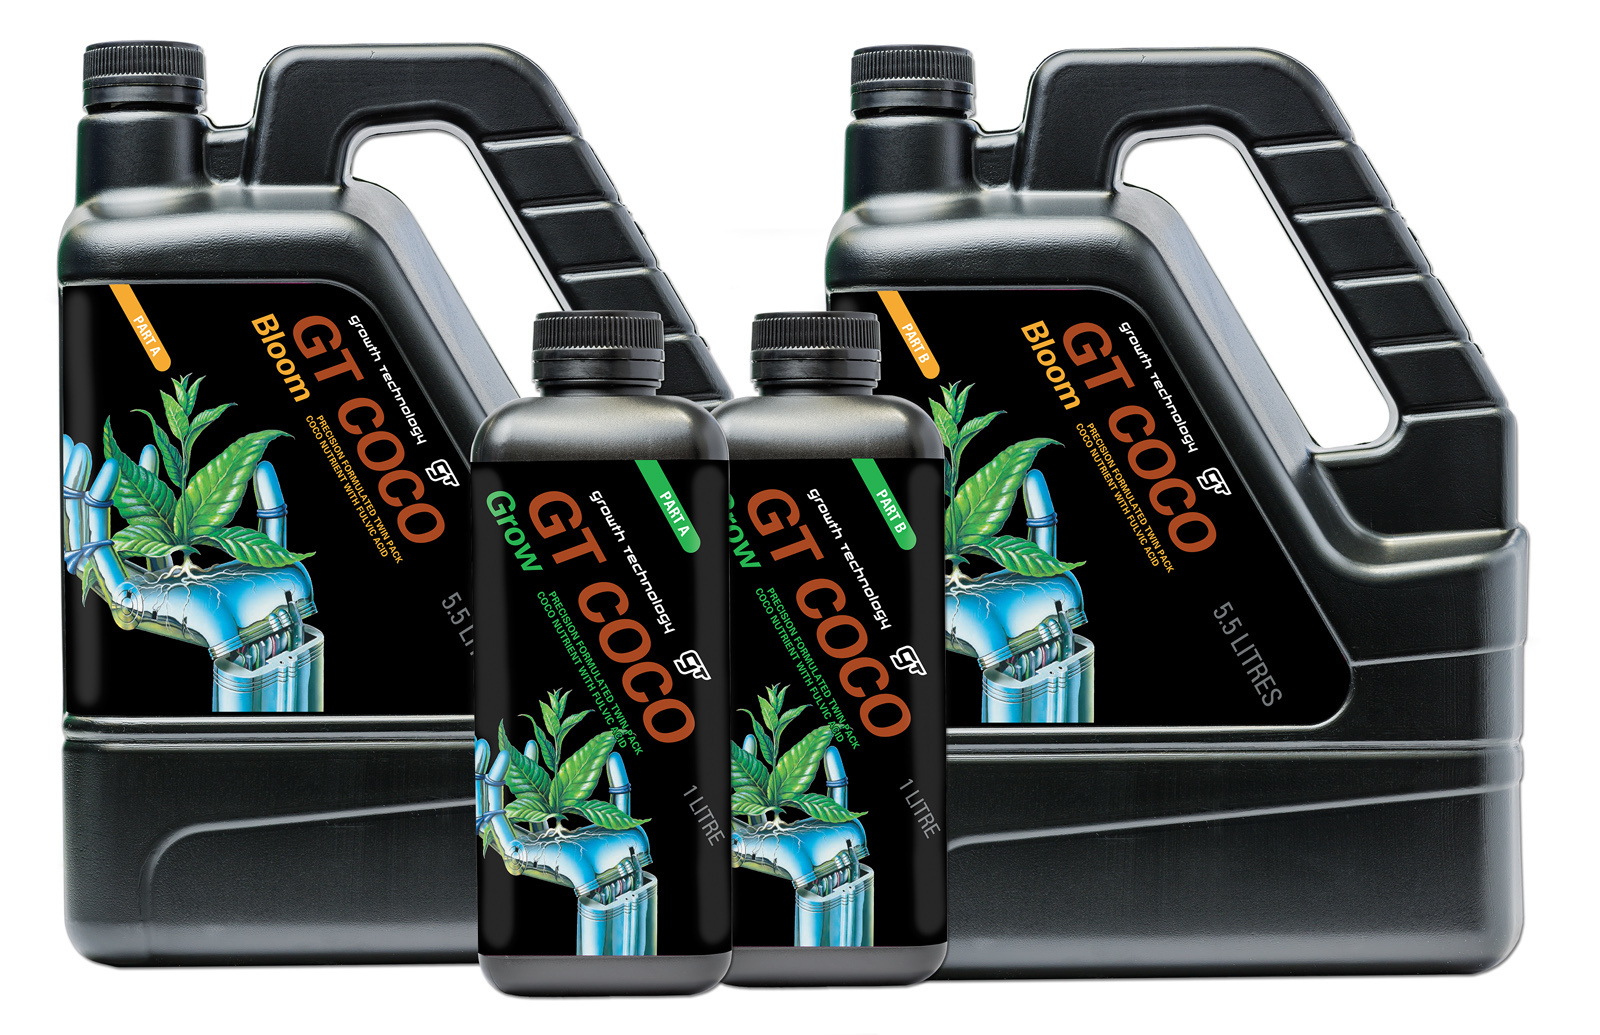 GT Coco Bloom 1+1Ltr = 2Ltr set - Growth technology makers of Optimum Grow